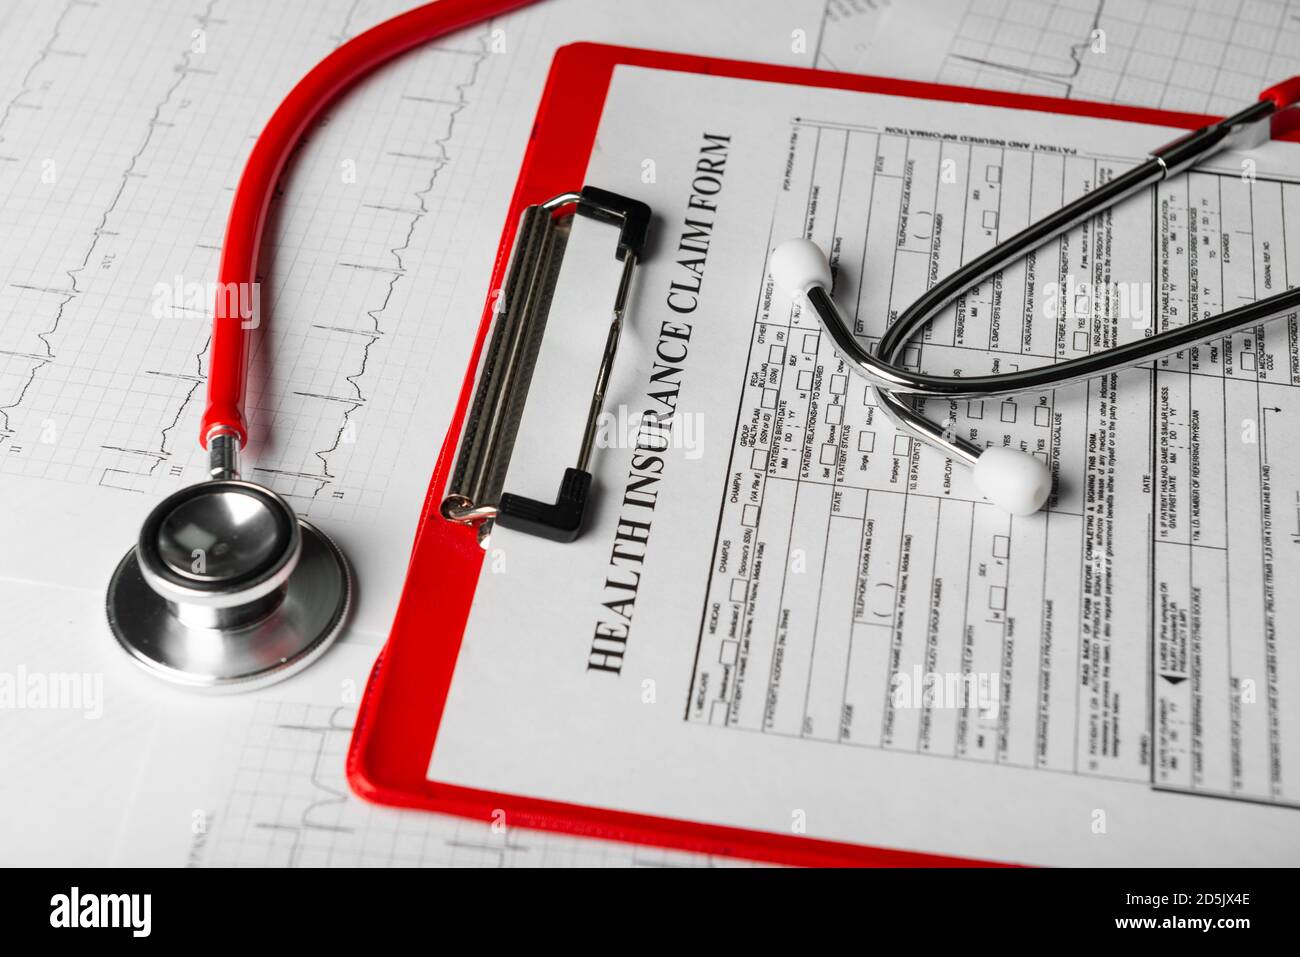 Health insurance form with stethoscope concept for life planning Stock Photo